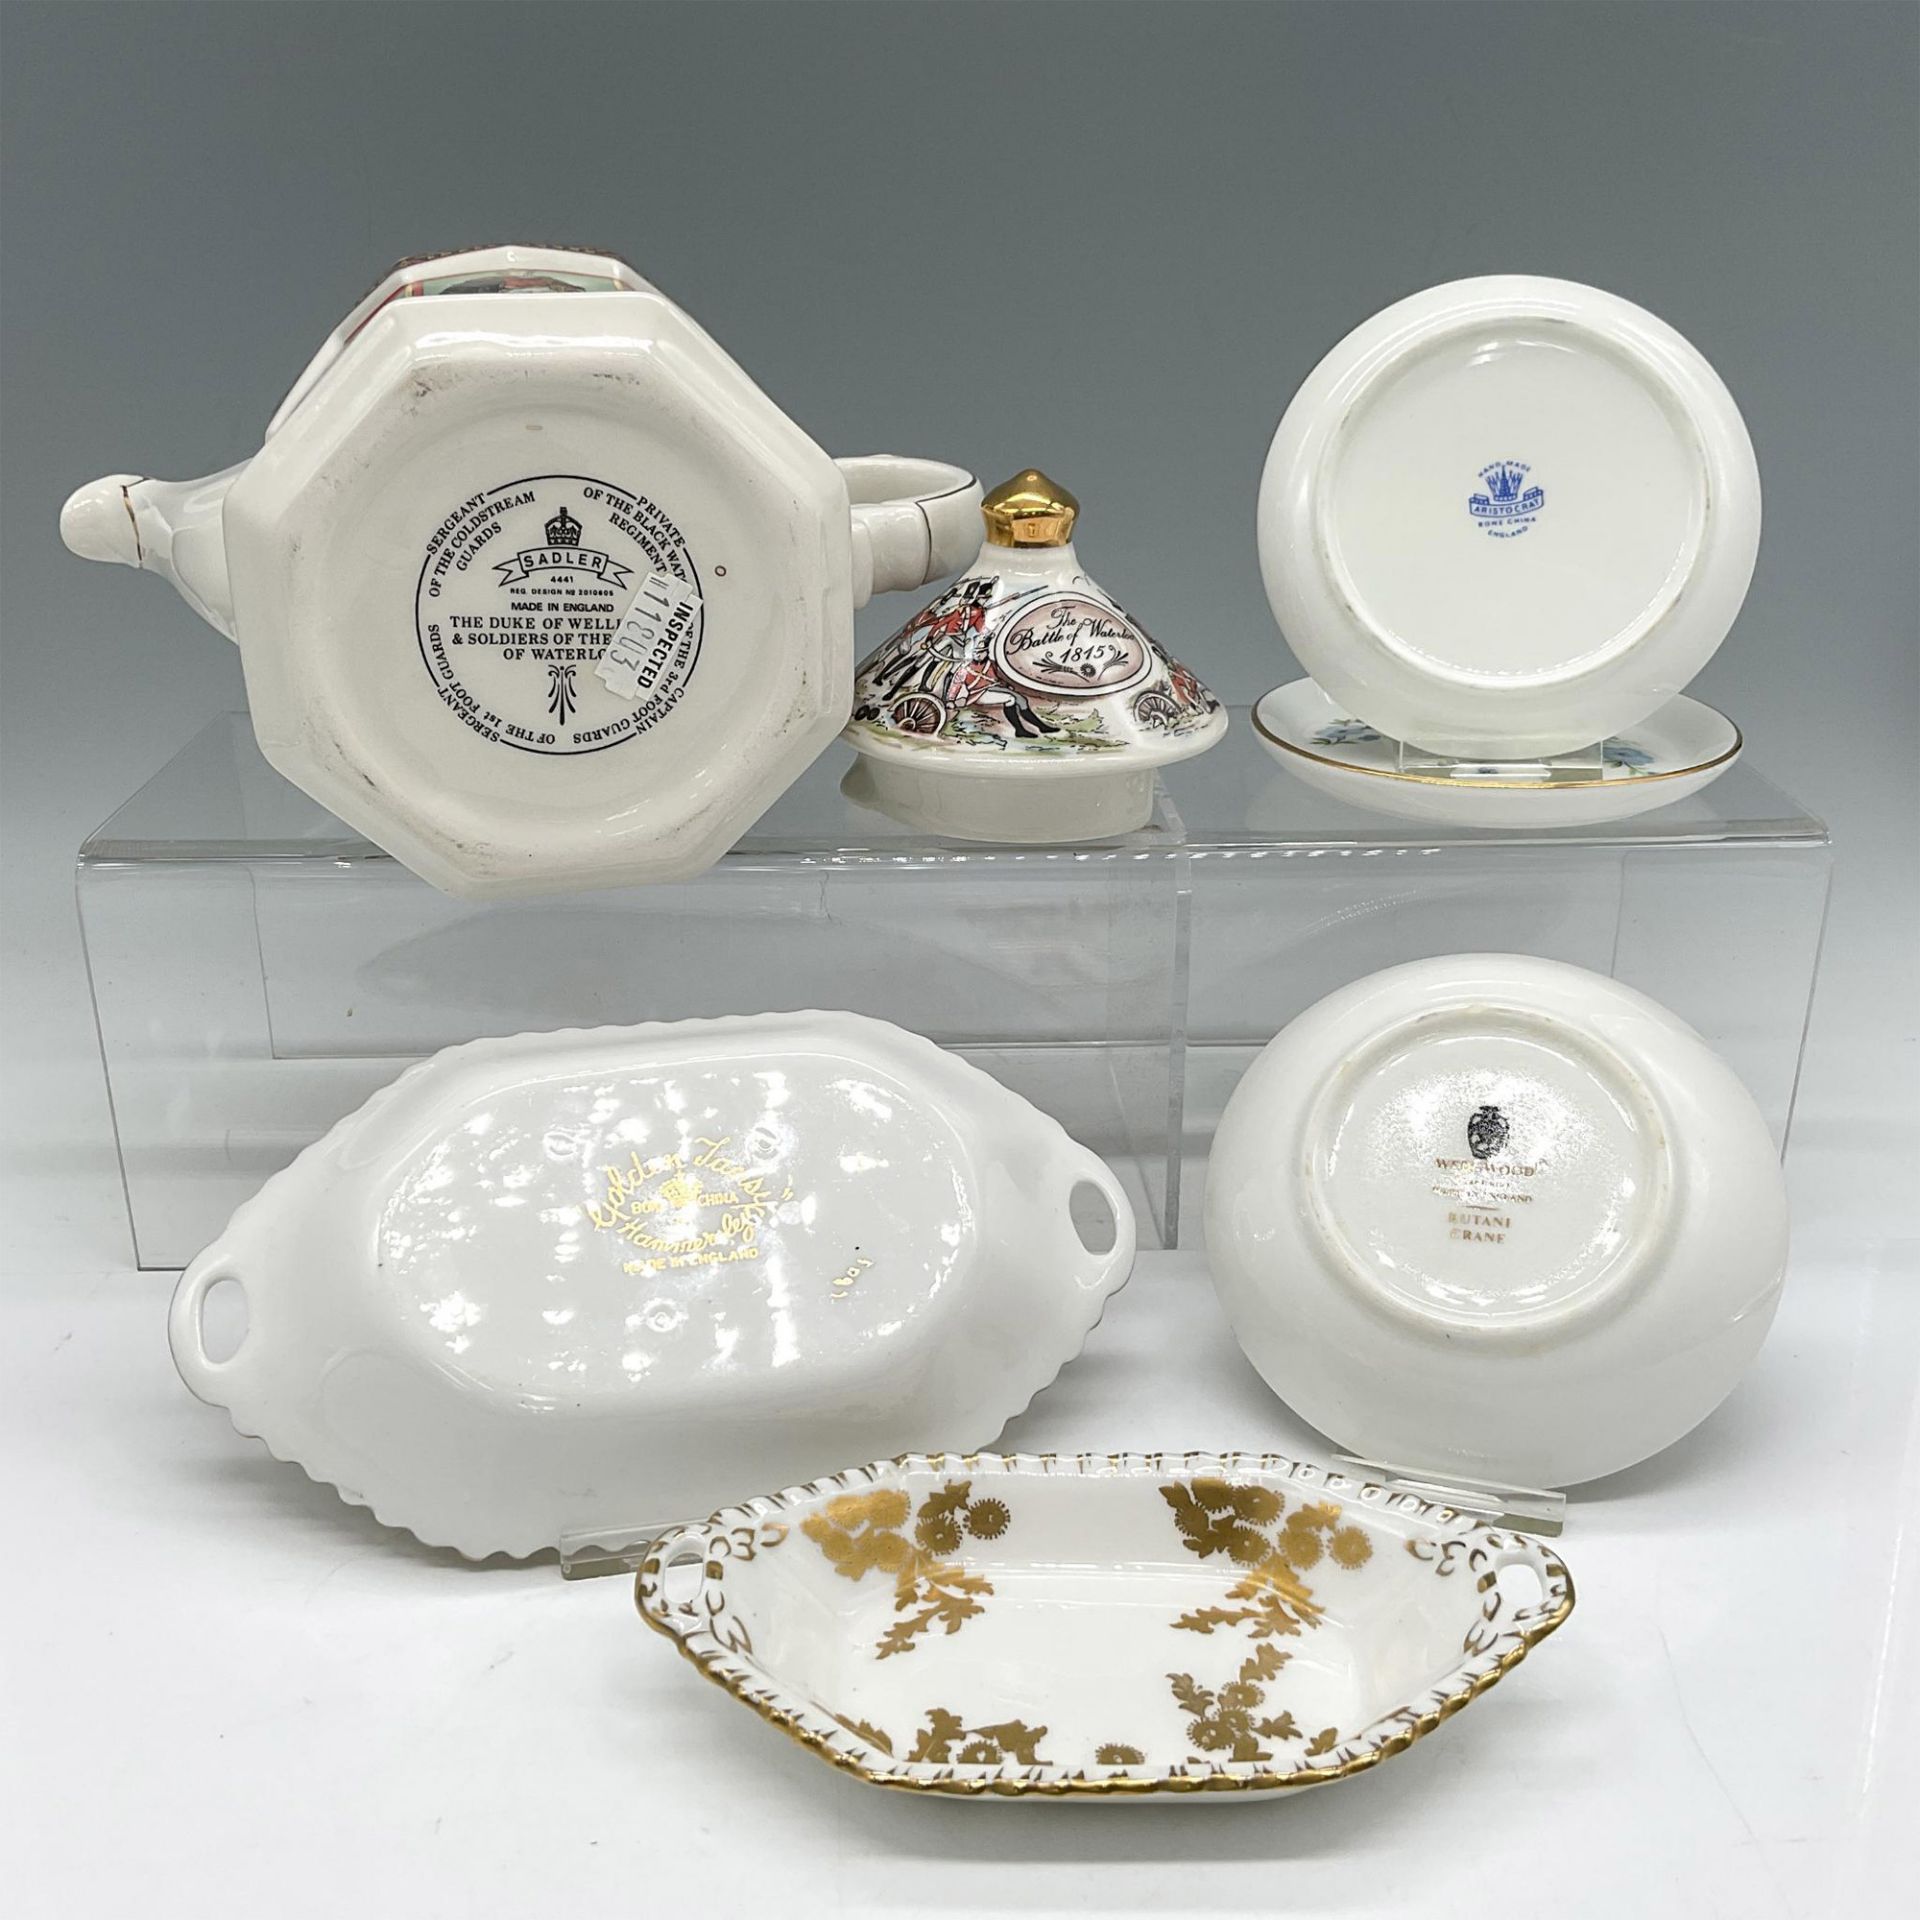 6pc English Porcelain and Bone China Teapot + Candy dishes - Image 3 of 3